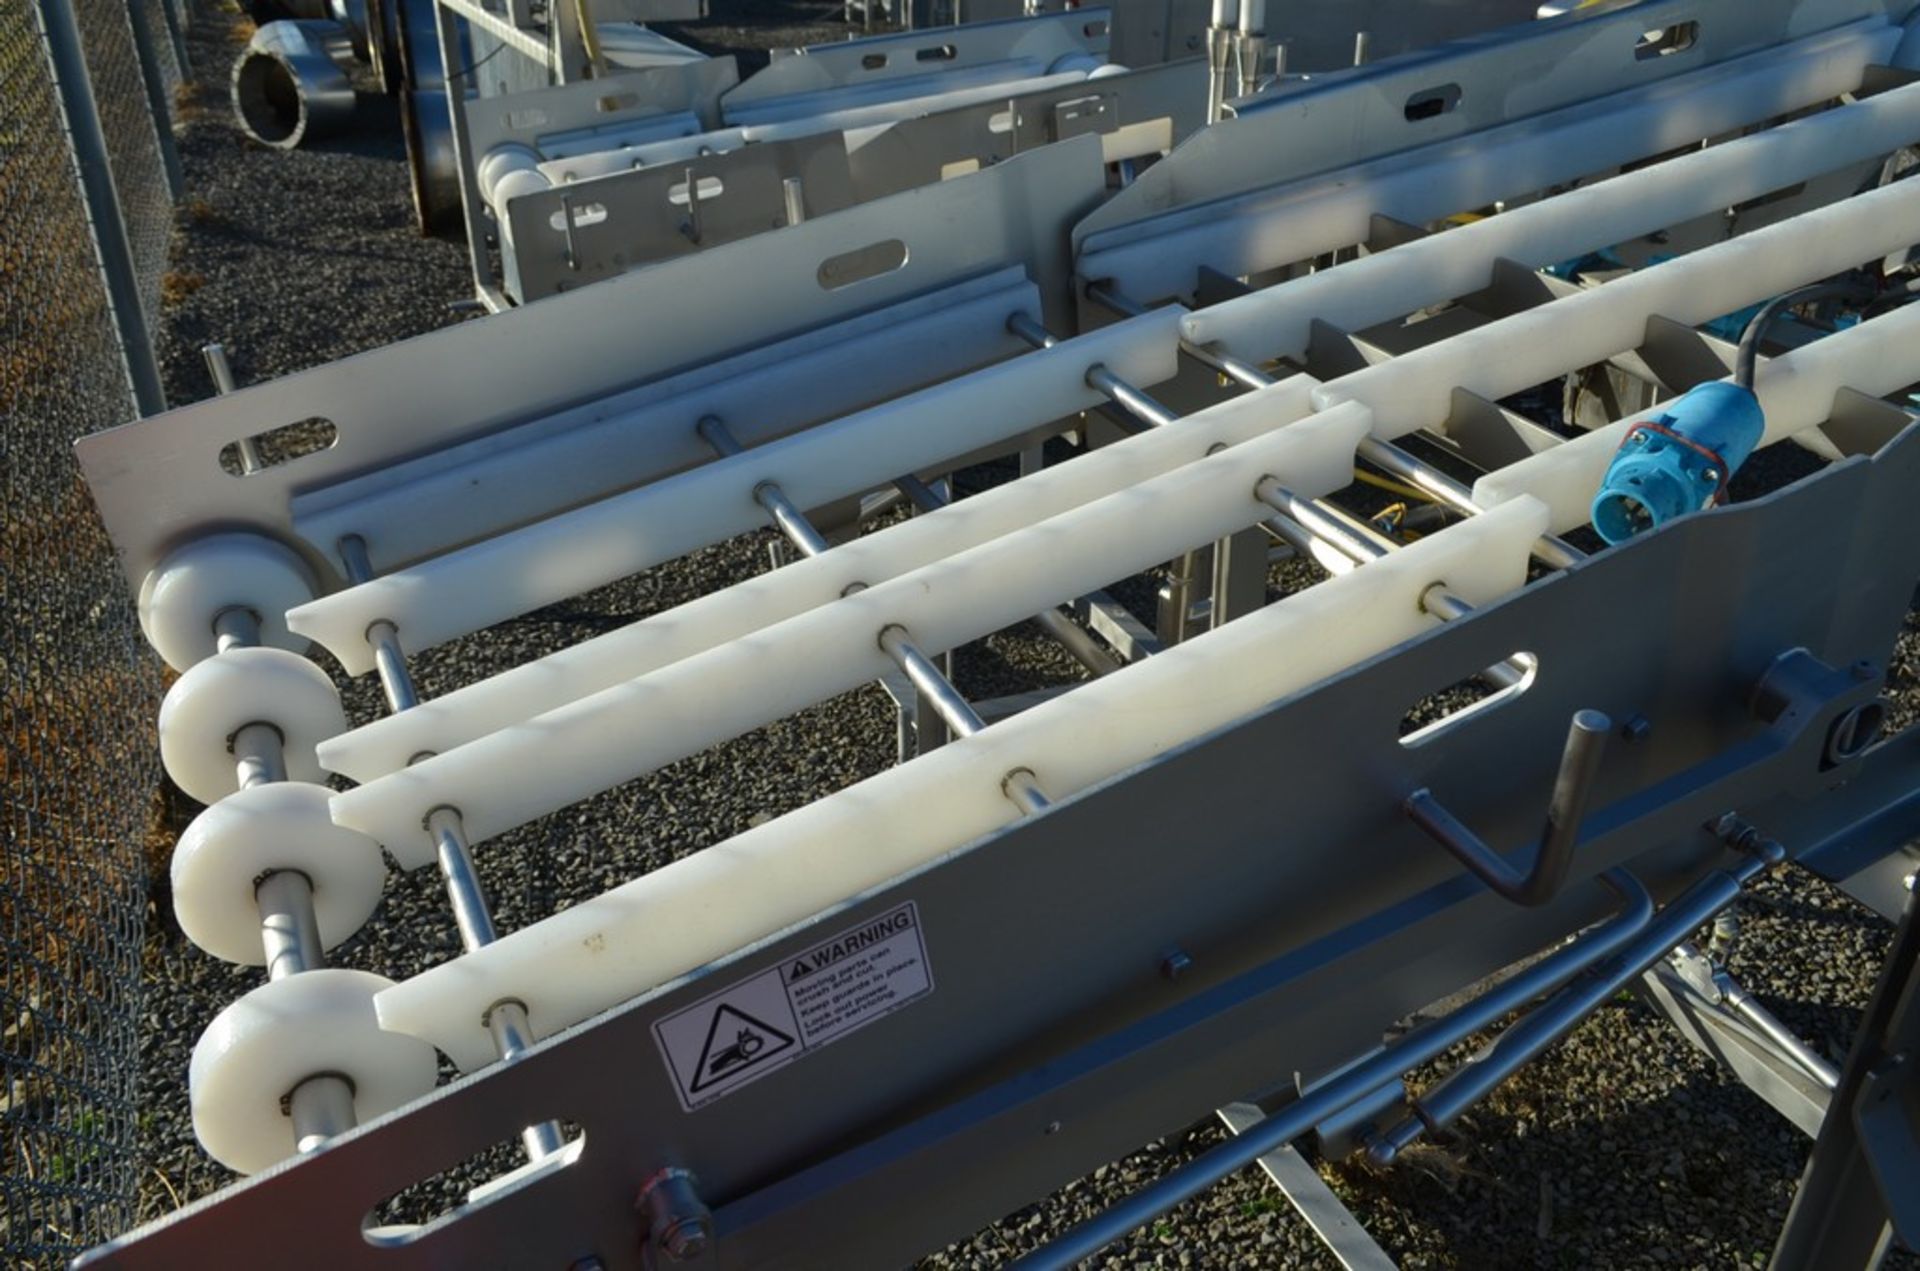 6ft. Long X 24in Wide S/S Conveyor Frame with S/S Motor (No Belt) - Image 2 of 4